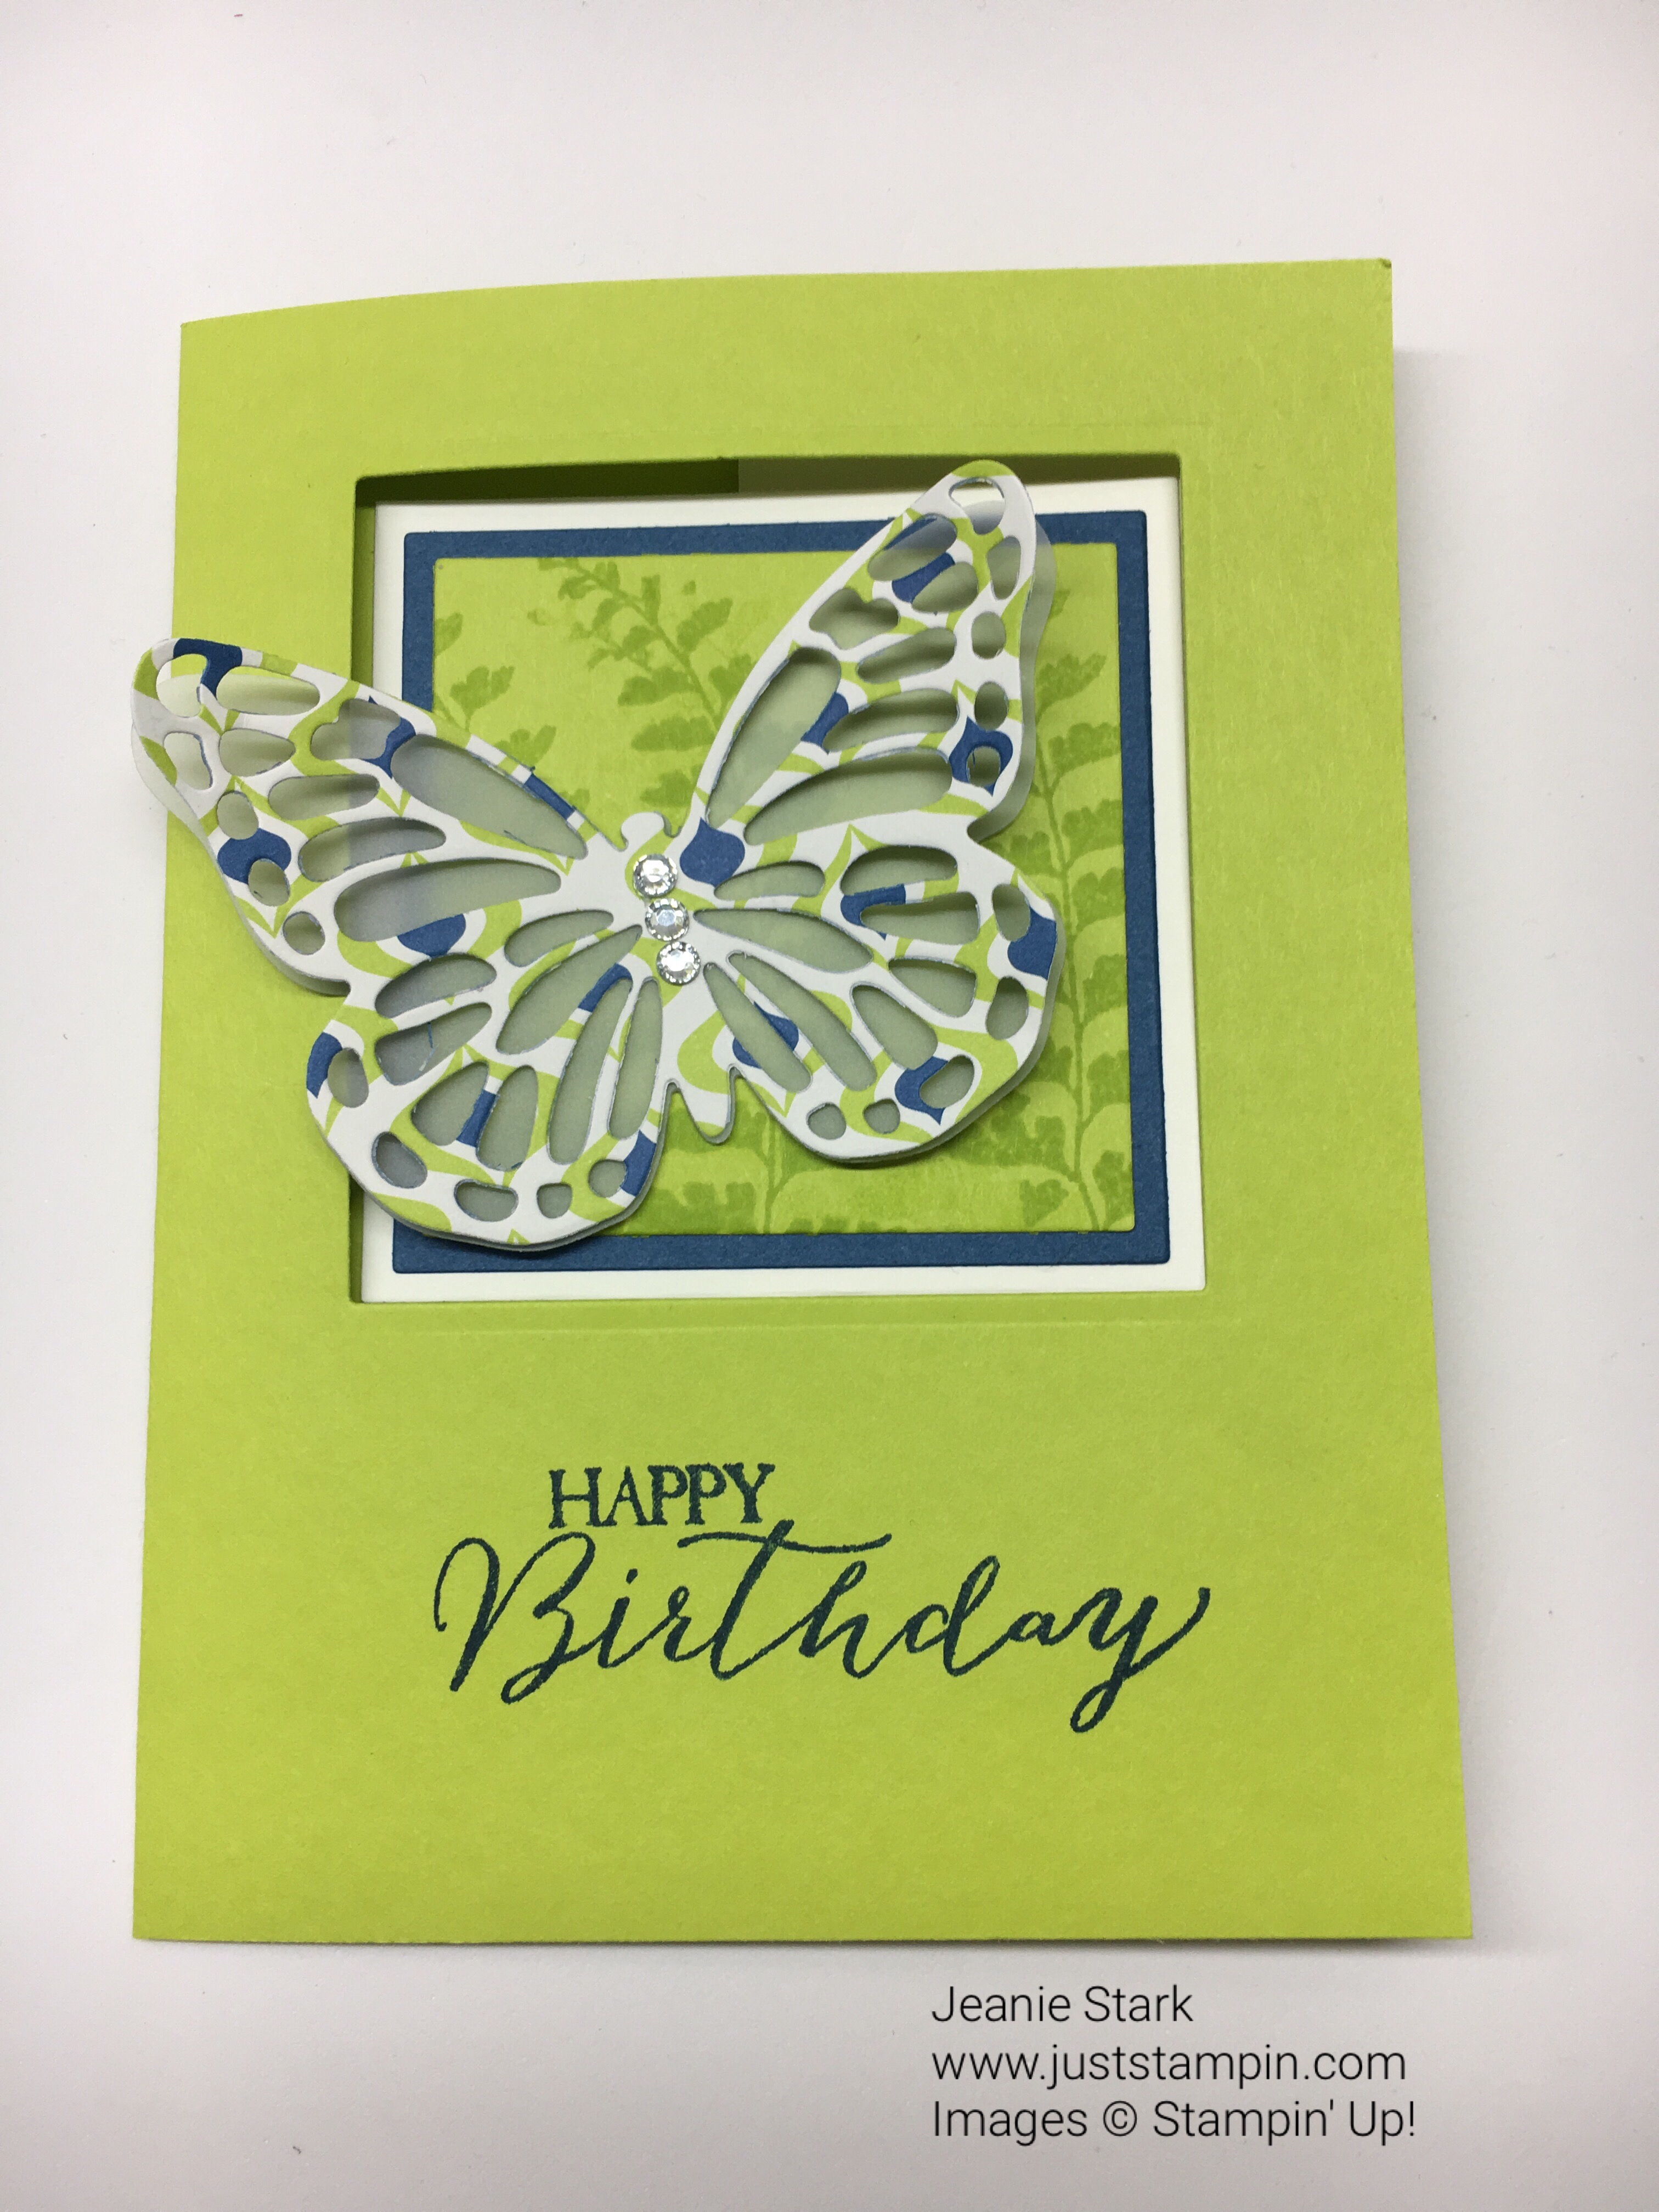 Stampin Up Happy Birthday fun fold lever card using Butterfly Basics stamp set and Butterflies Thinlits. For more fun fold card ideas and inspiration visit www.juststampin.com